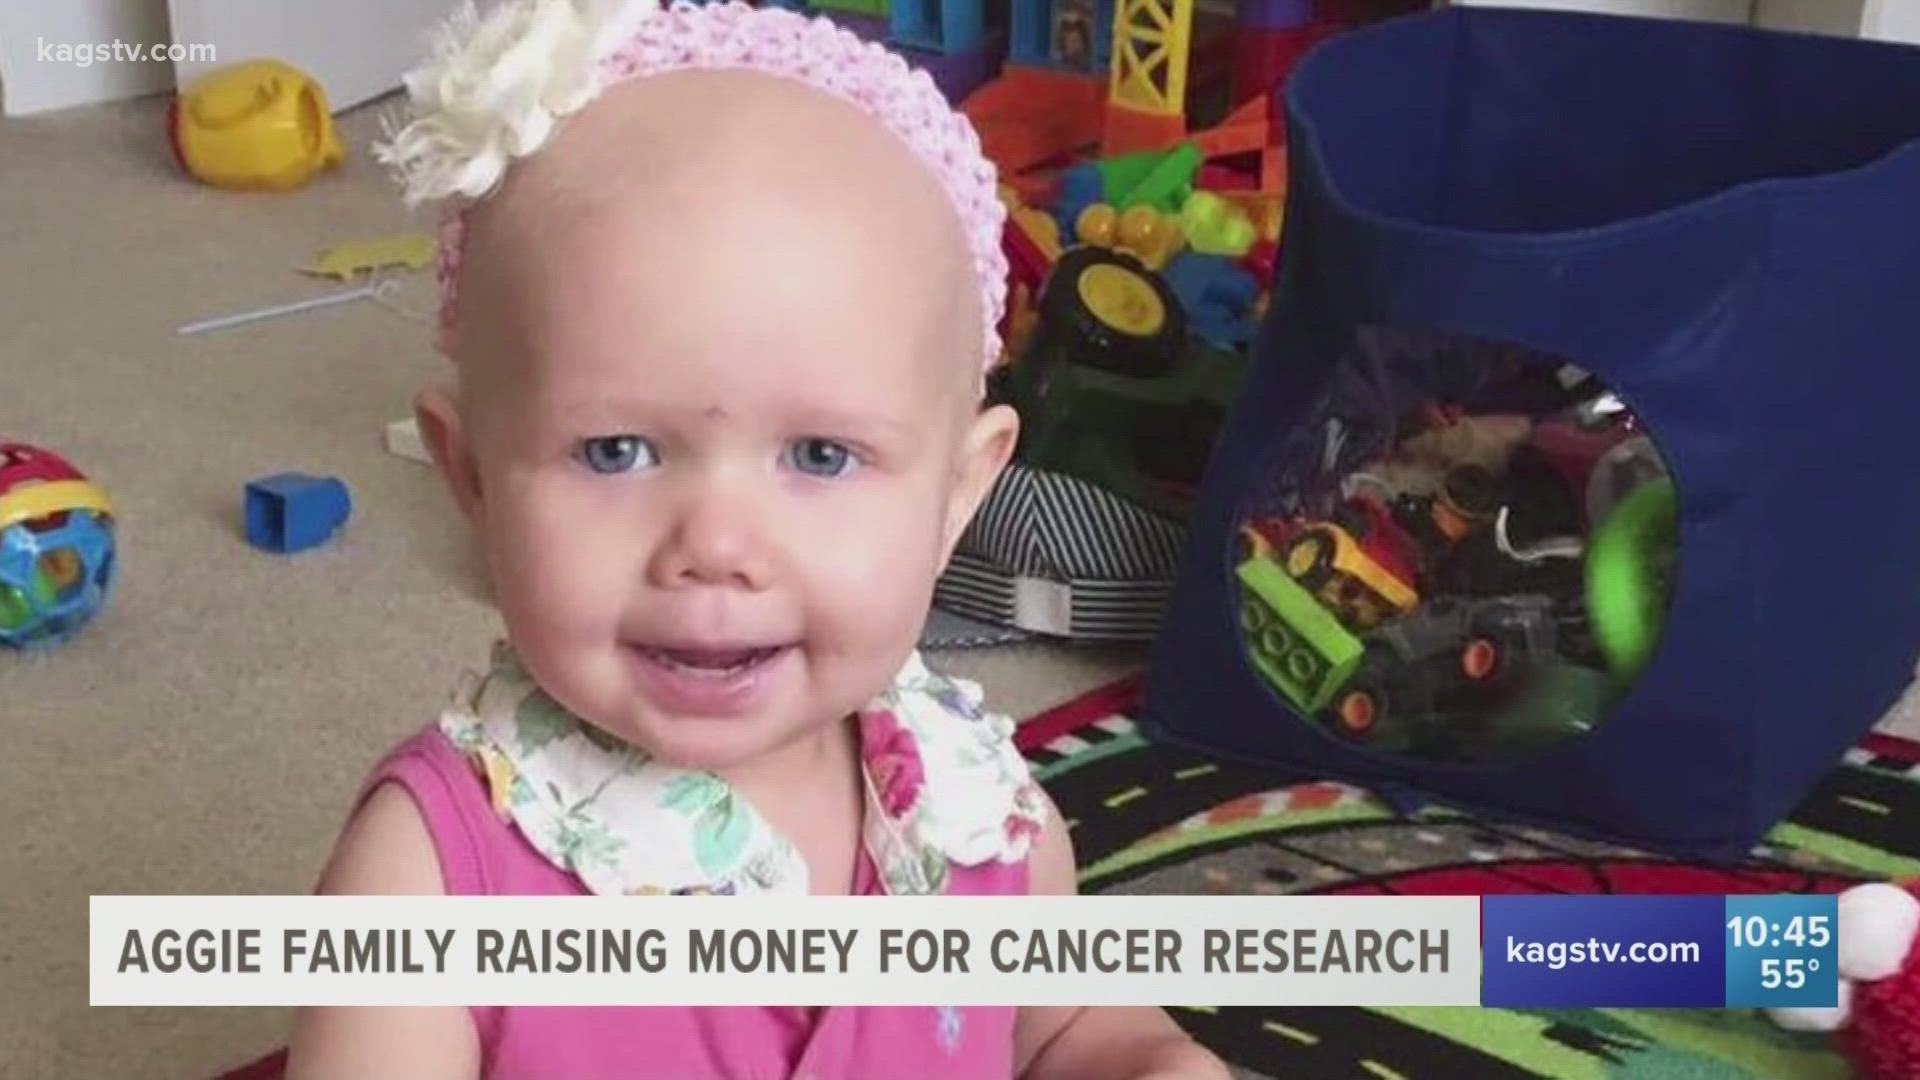 Hannah Hildebrand was only a year old when her parents got a devastating diagnosis. Now, cancer free, the Aggie family is working to raise $100K for cancer research.